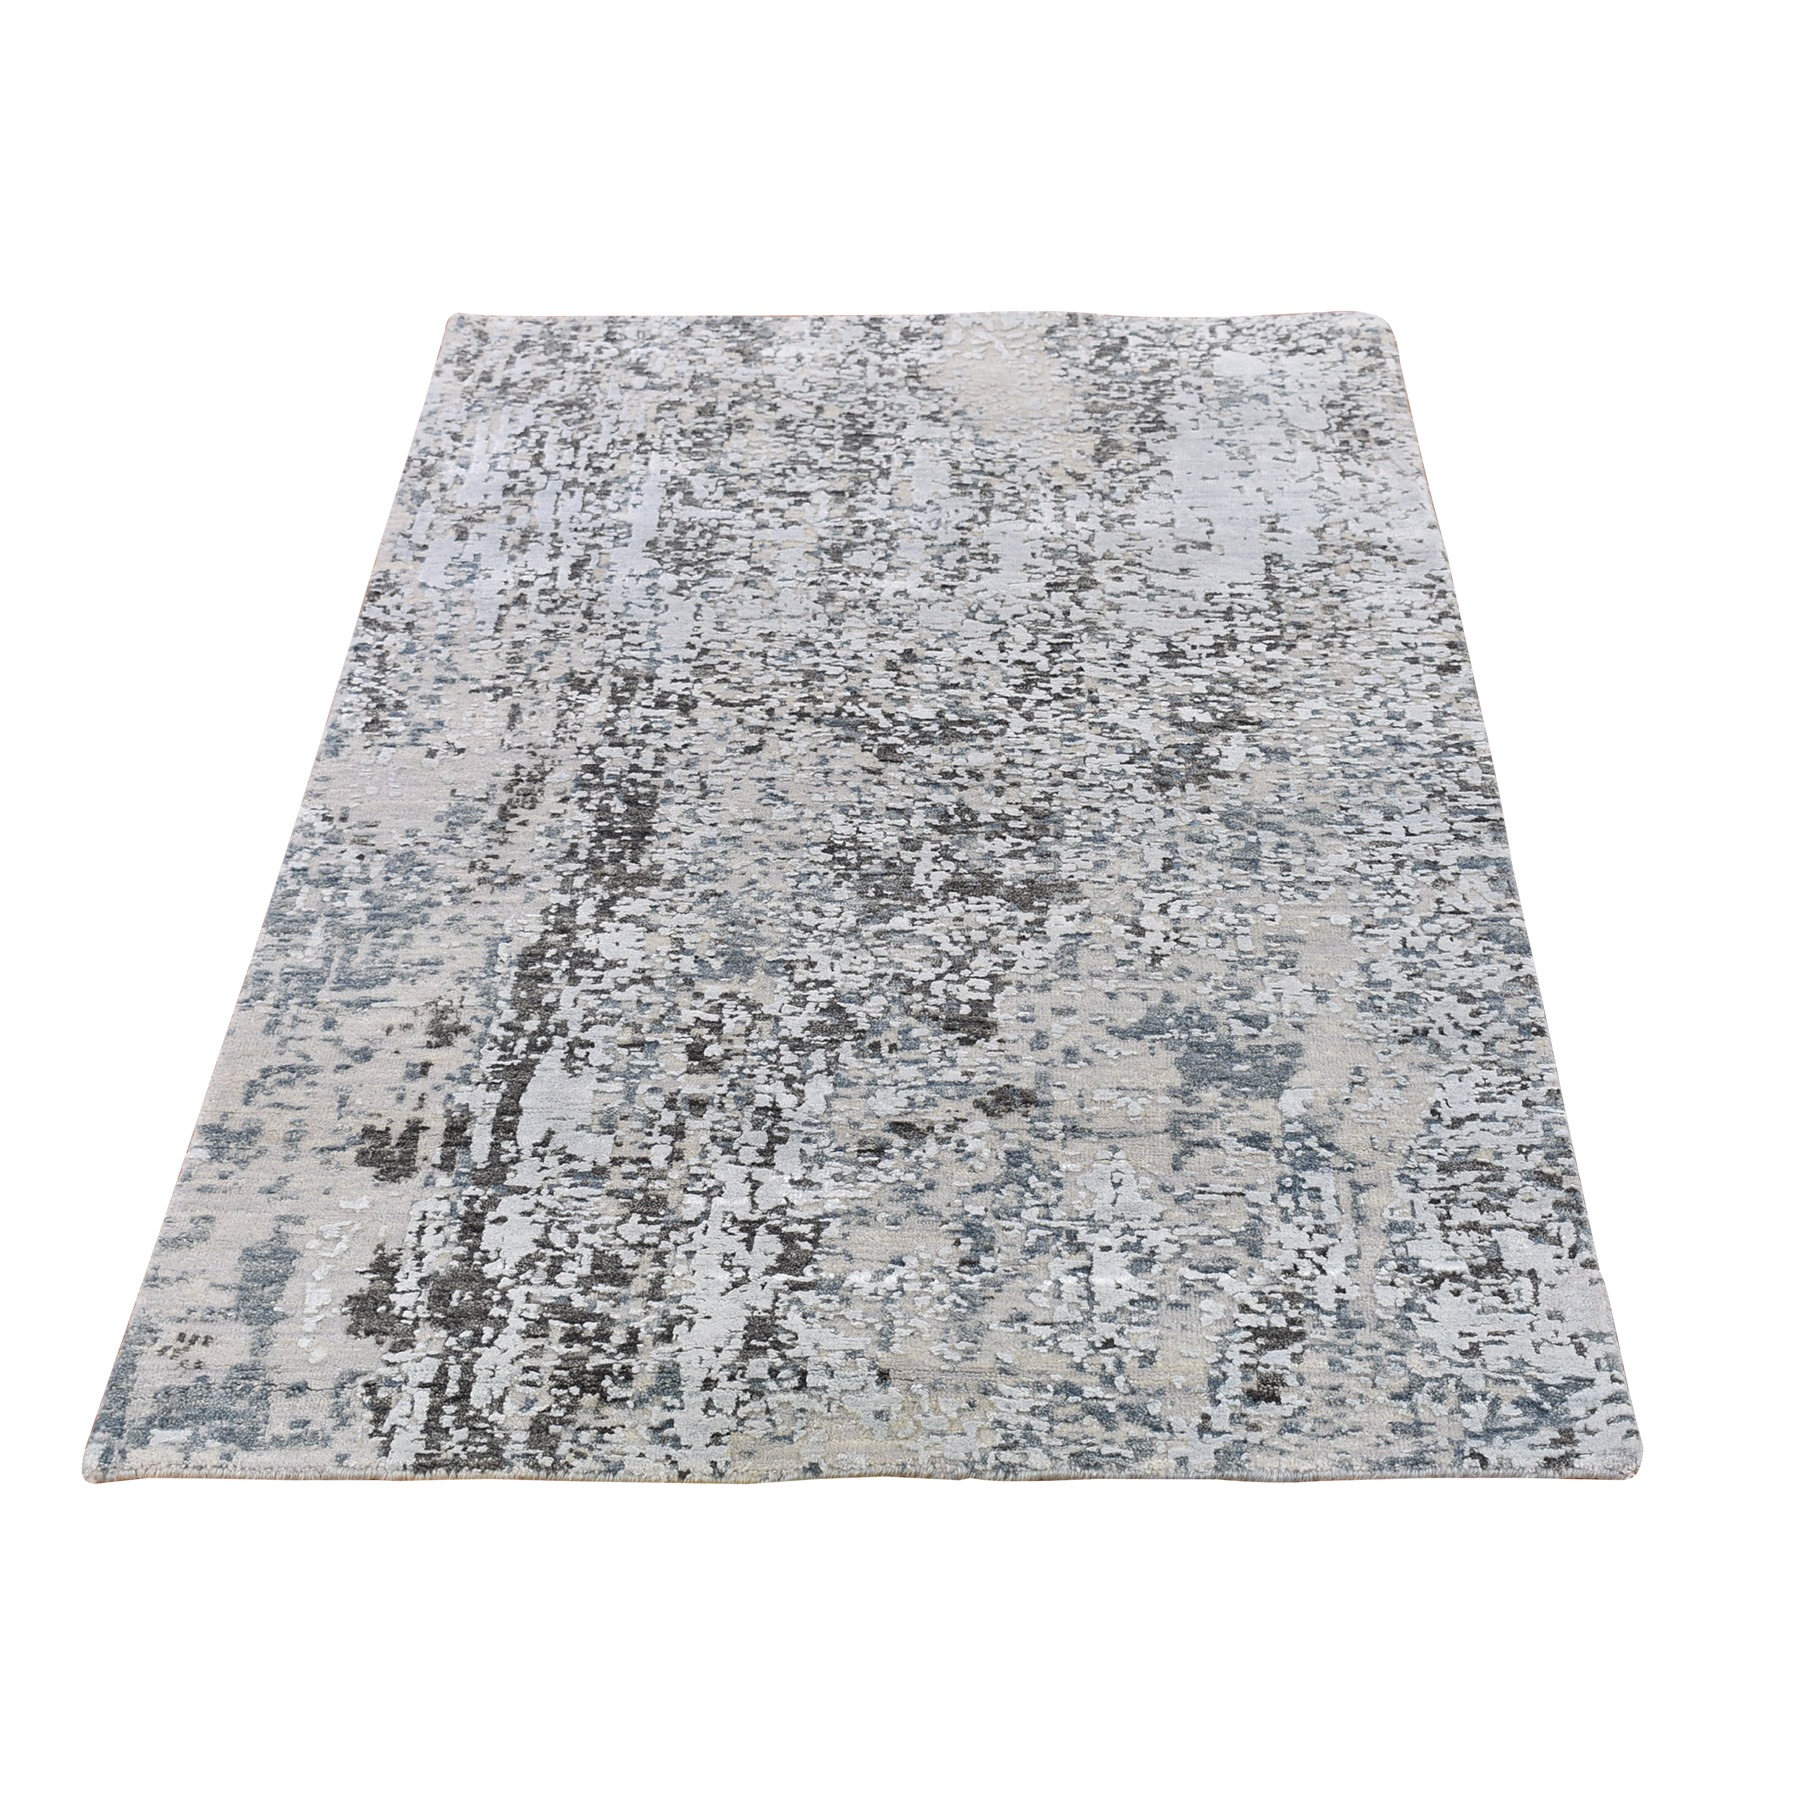 3'x5' Silver Wool and Silk Persian Knot Denser Weave Abstract Design Hand Woven Oriental Rug 